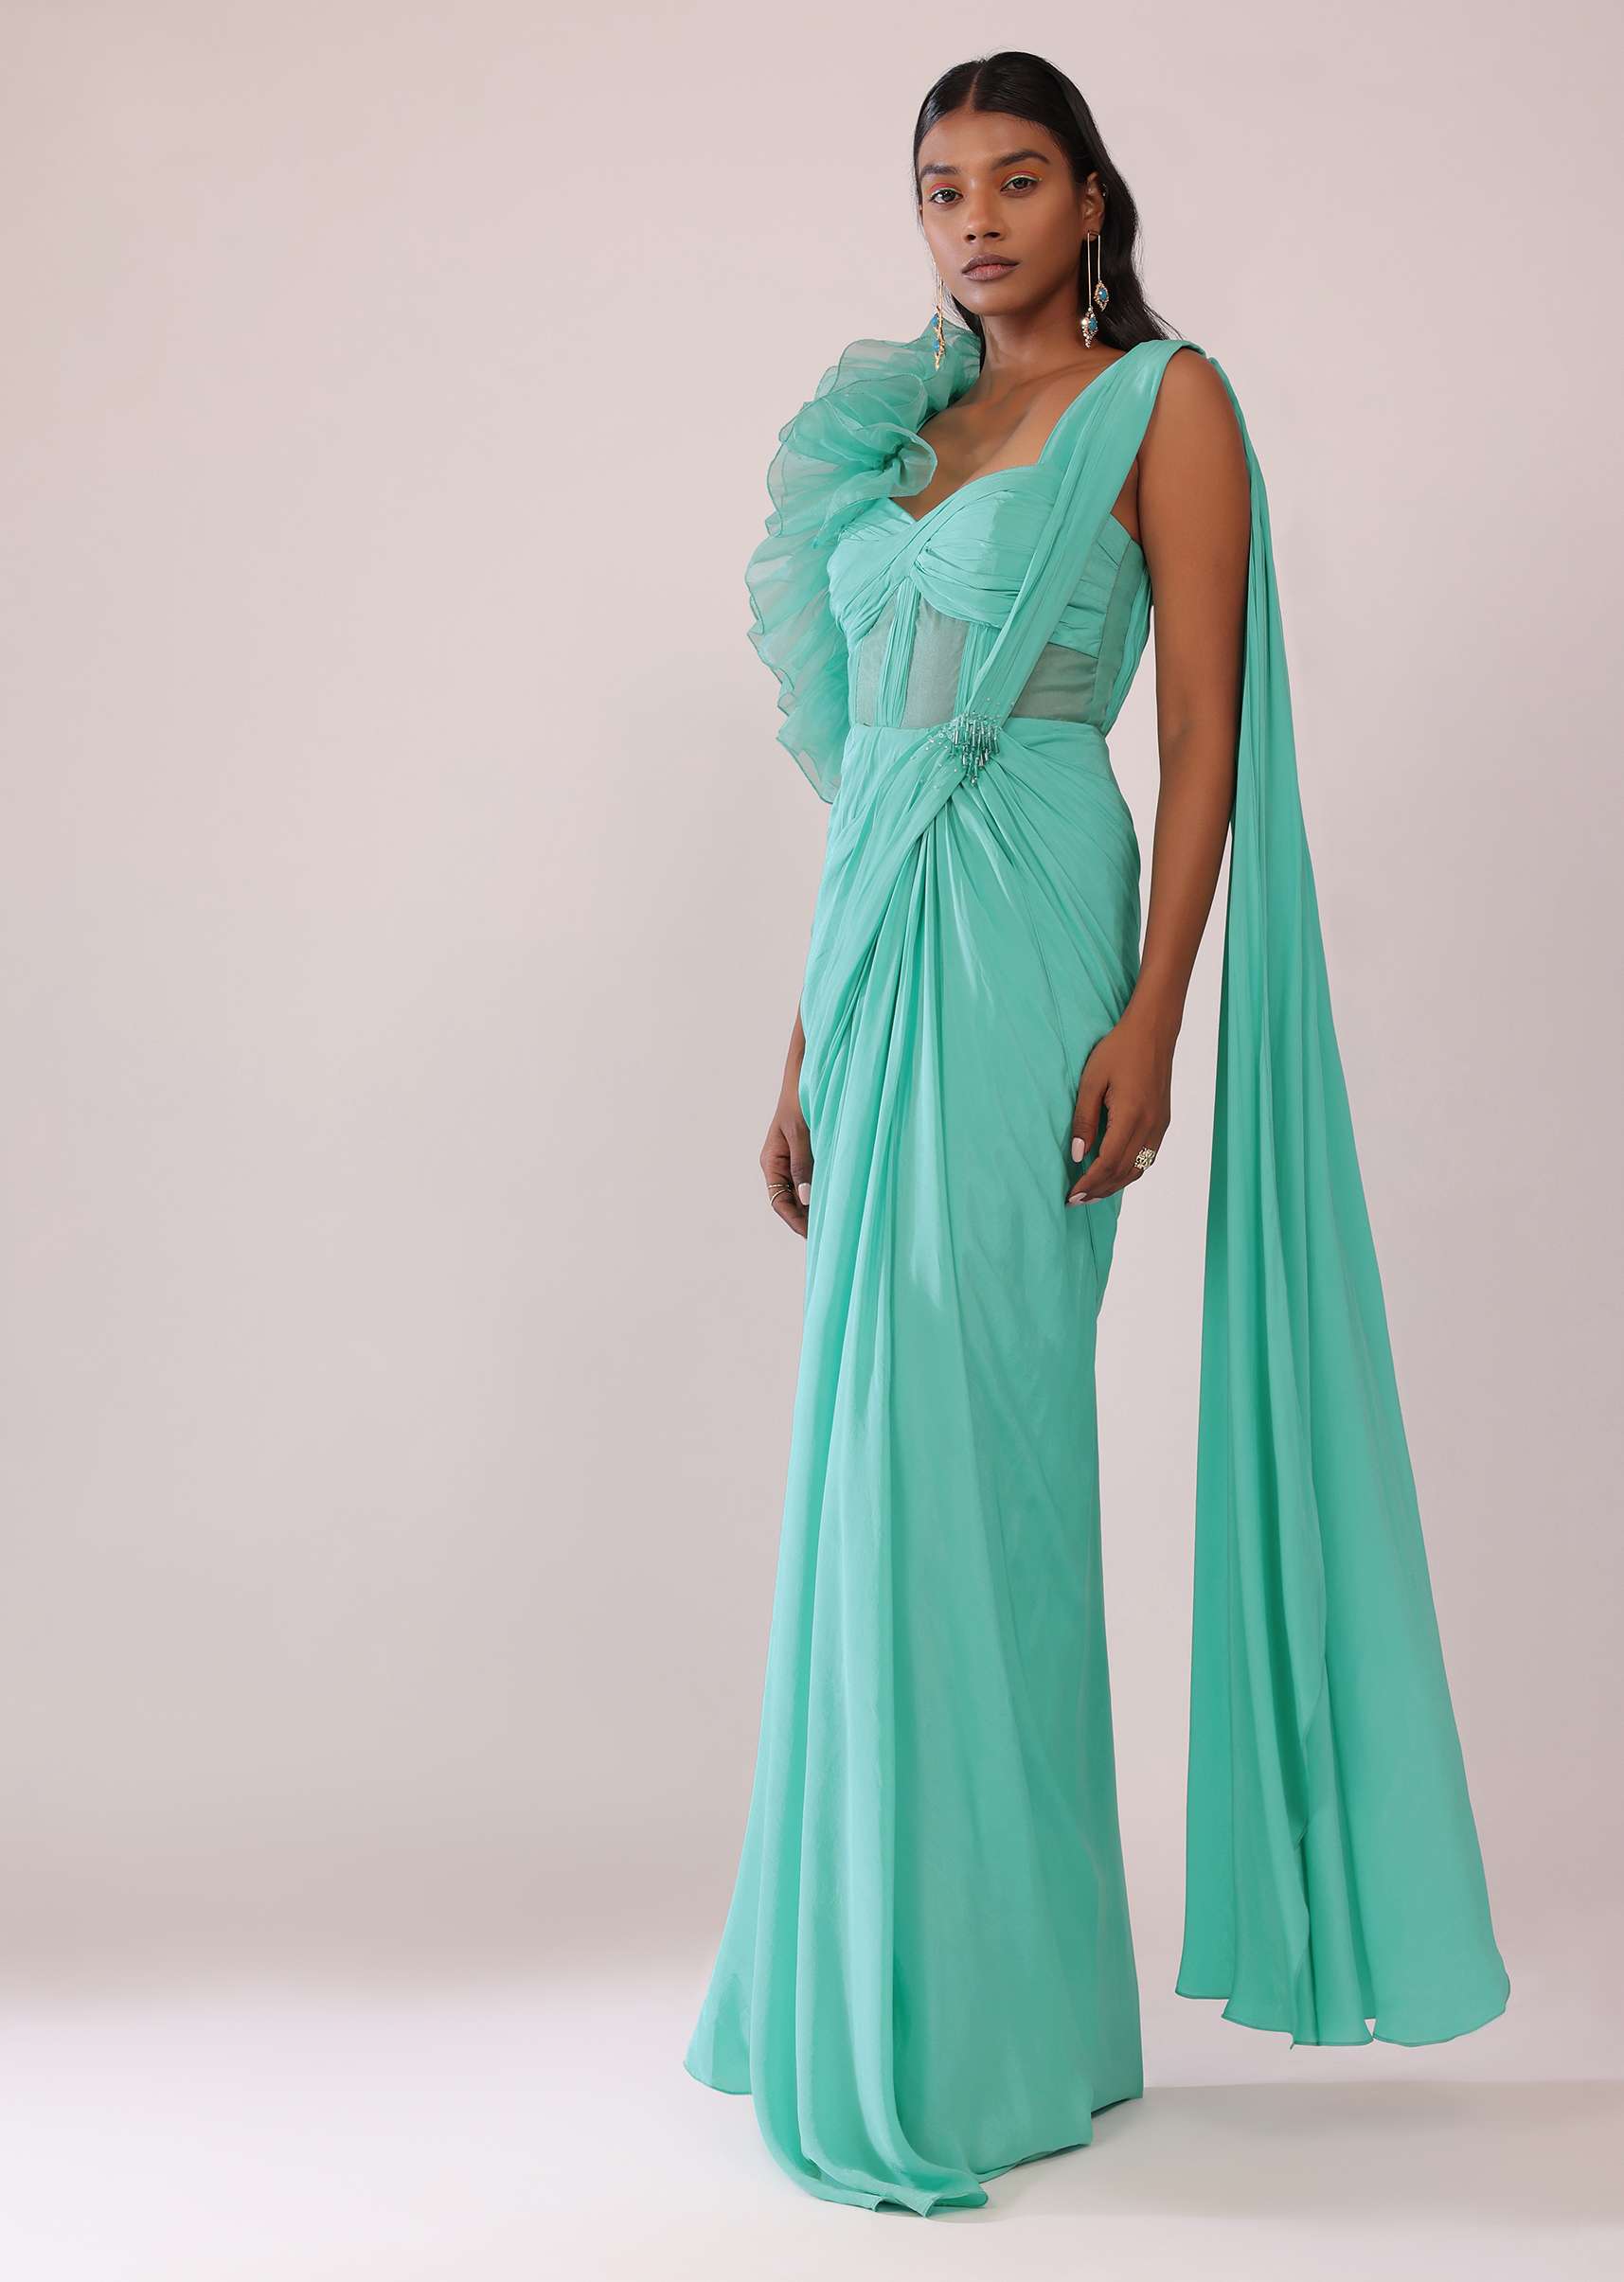 Aqua Green Corset Saree Gown In Crepe With One Side Organza Ruffle